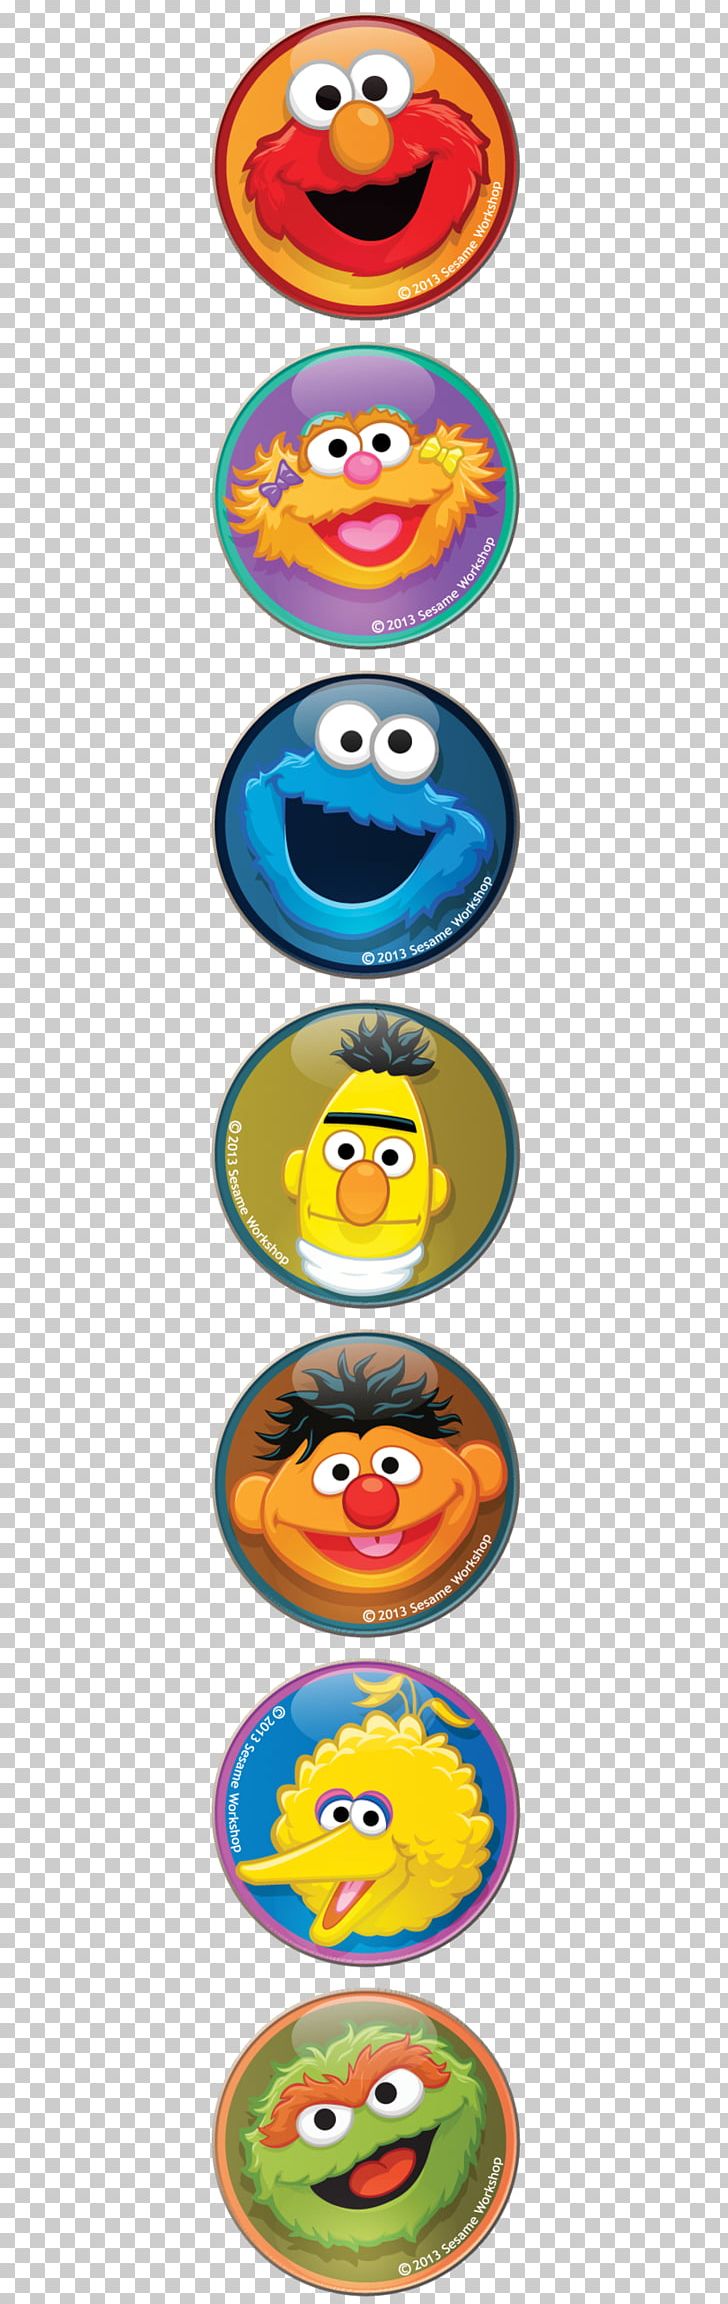 Cookie Monster Elmo Sesame Street Characters Oscar The Grouch PNG, Clipart, Art, Character, Circle, Cookie Monster, Elmo Free PNG Download